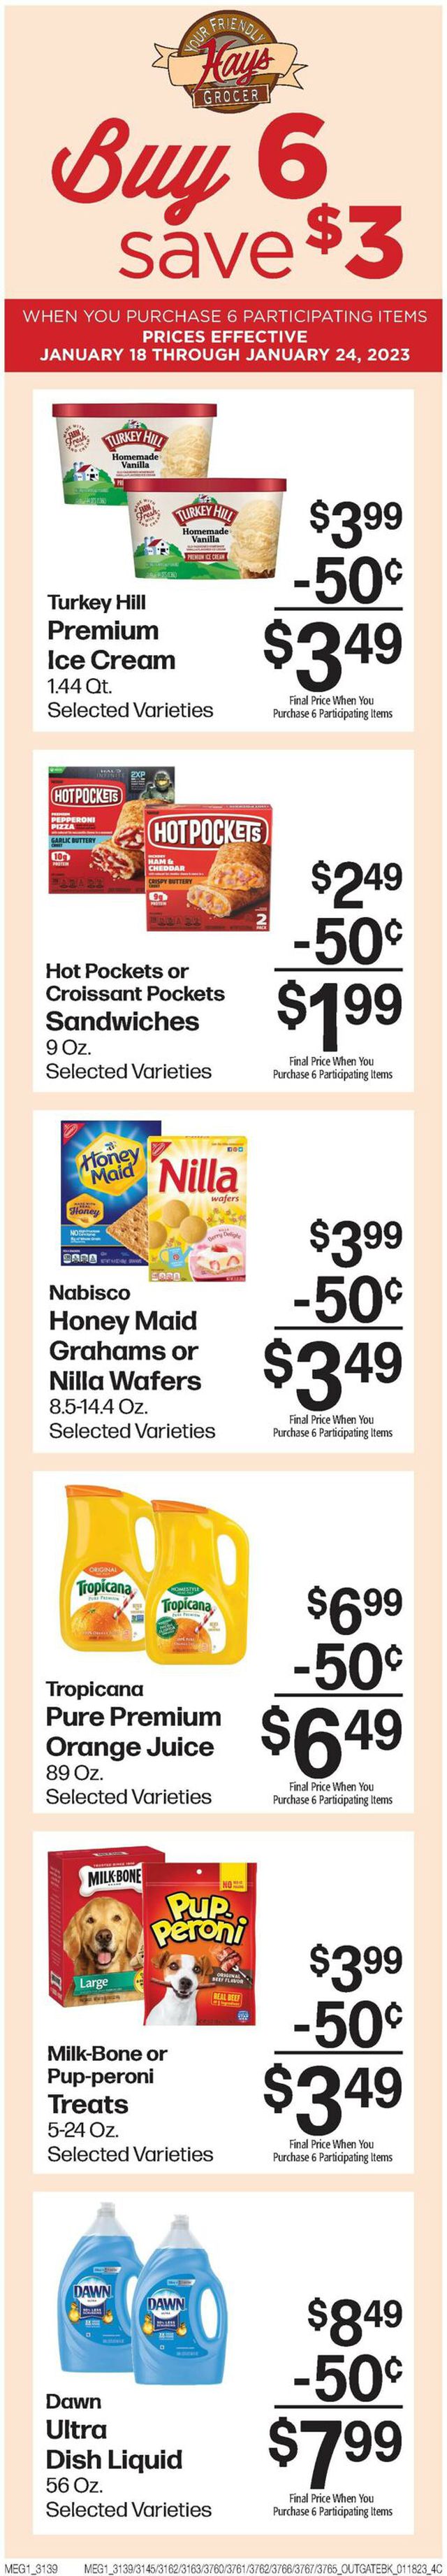 Hays Supermarket Ad from 01/18/2023